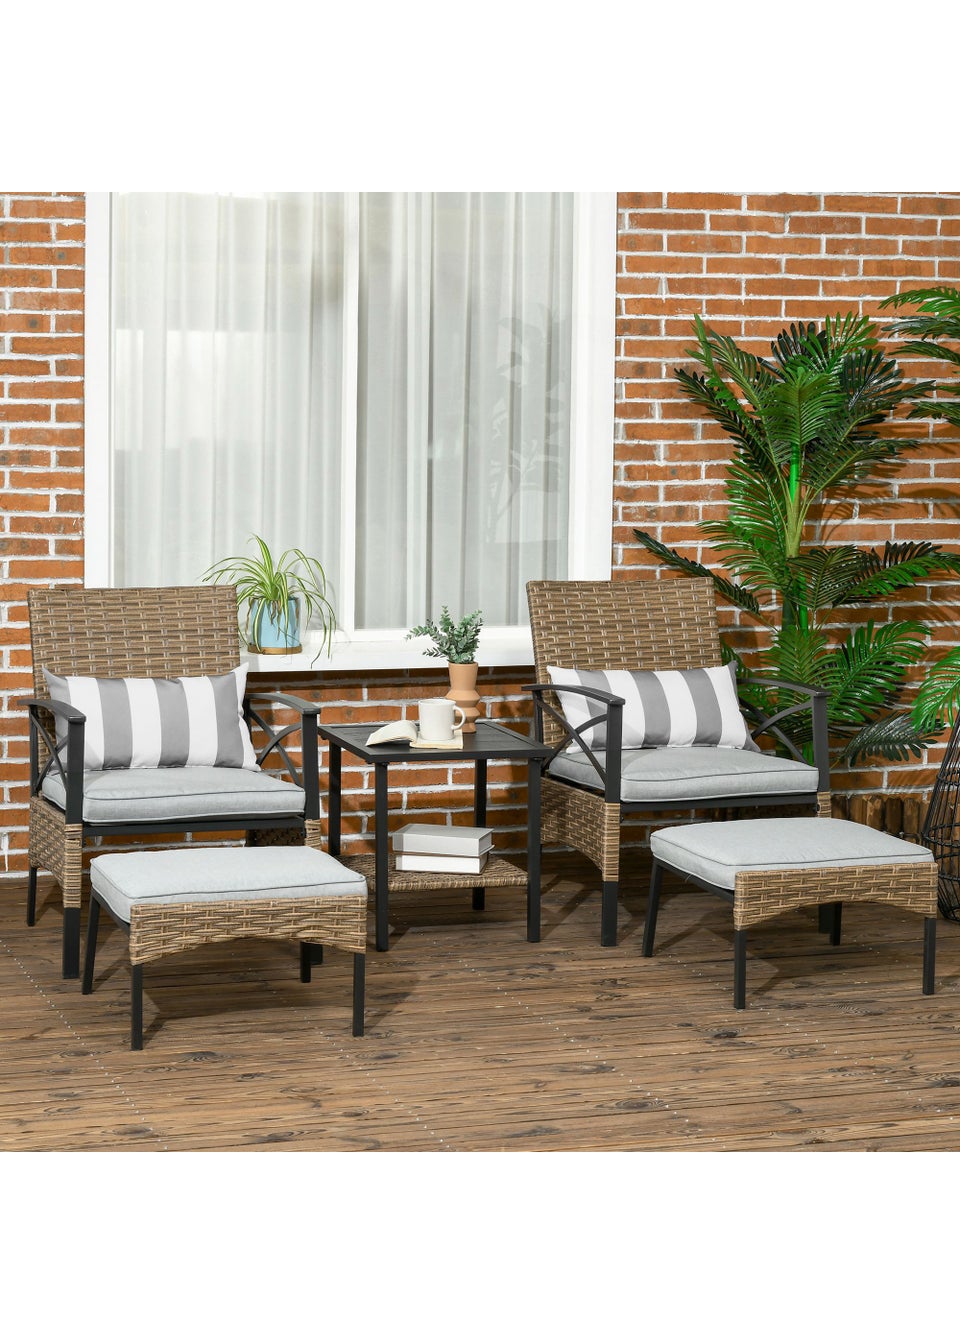 Outsunny 5 piece Rattan Garden Furniture Set with Chair, Footstool and Table, Grey